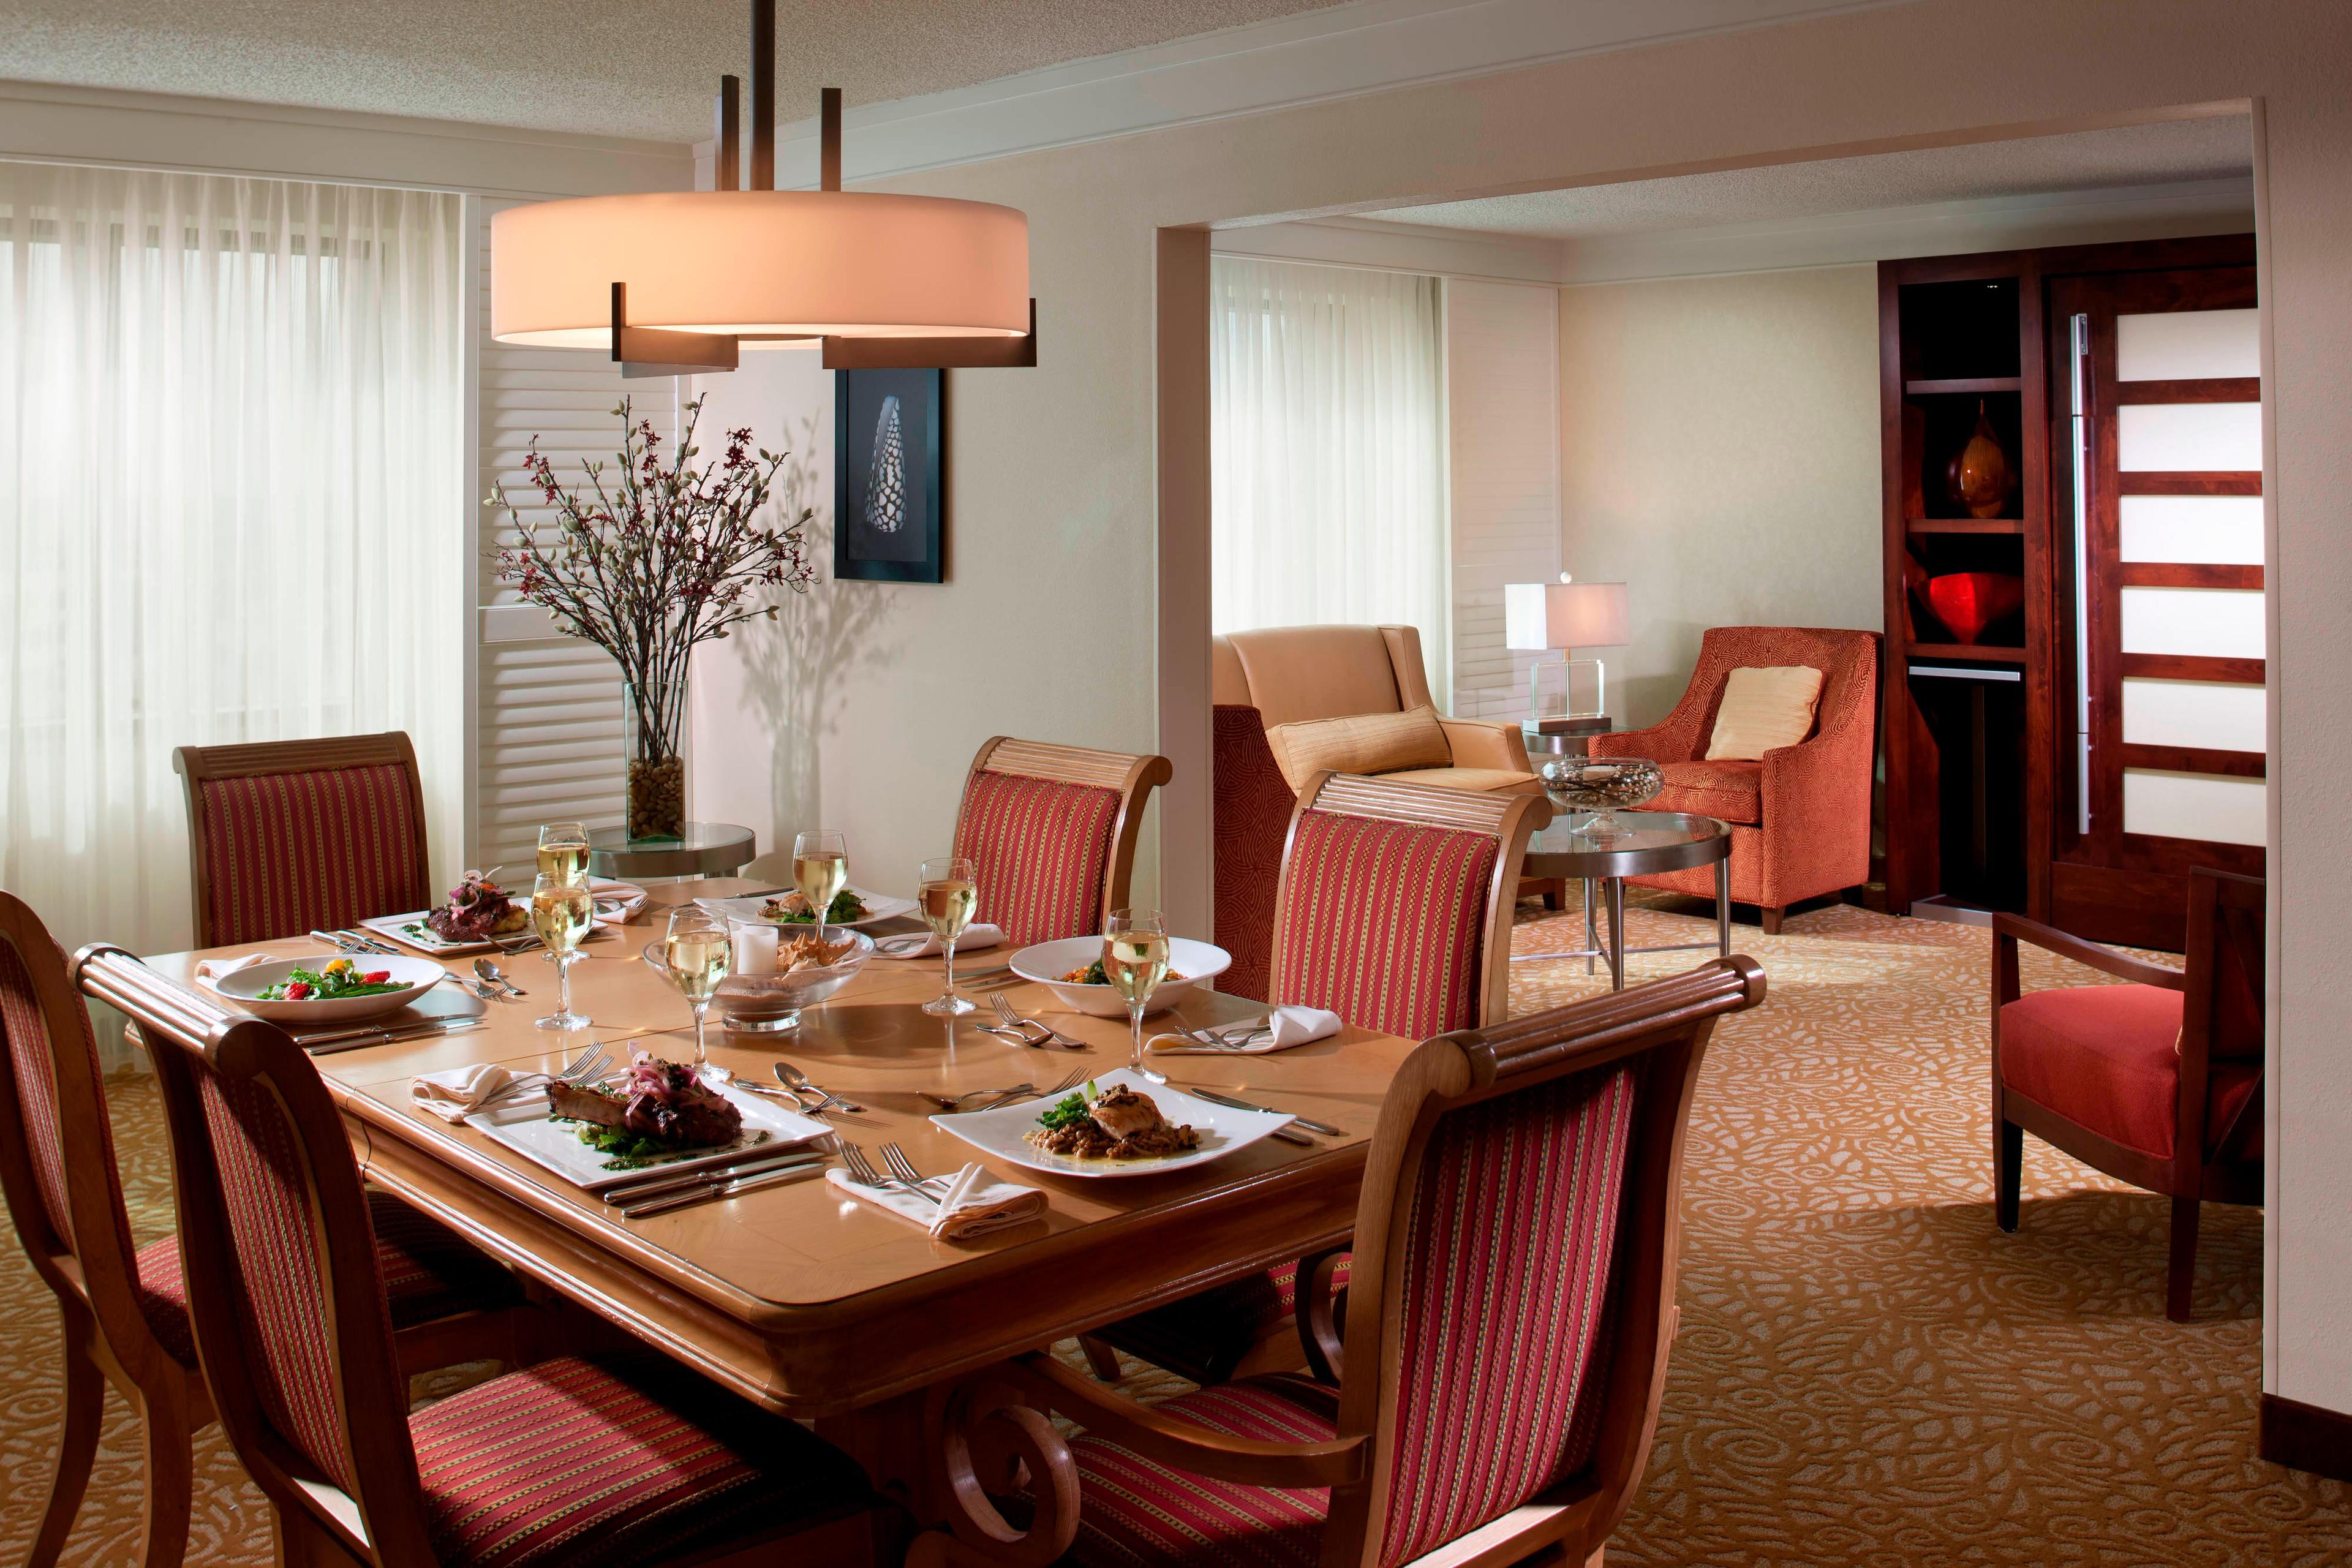 Stay in style in the Presidential Suite, which includes a spacious dining room perfect for entertaining.